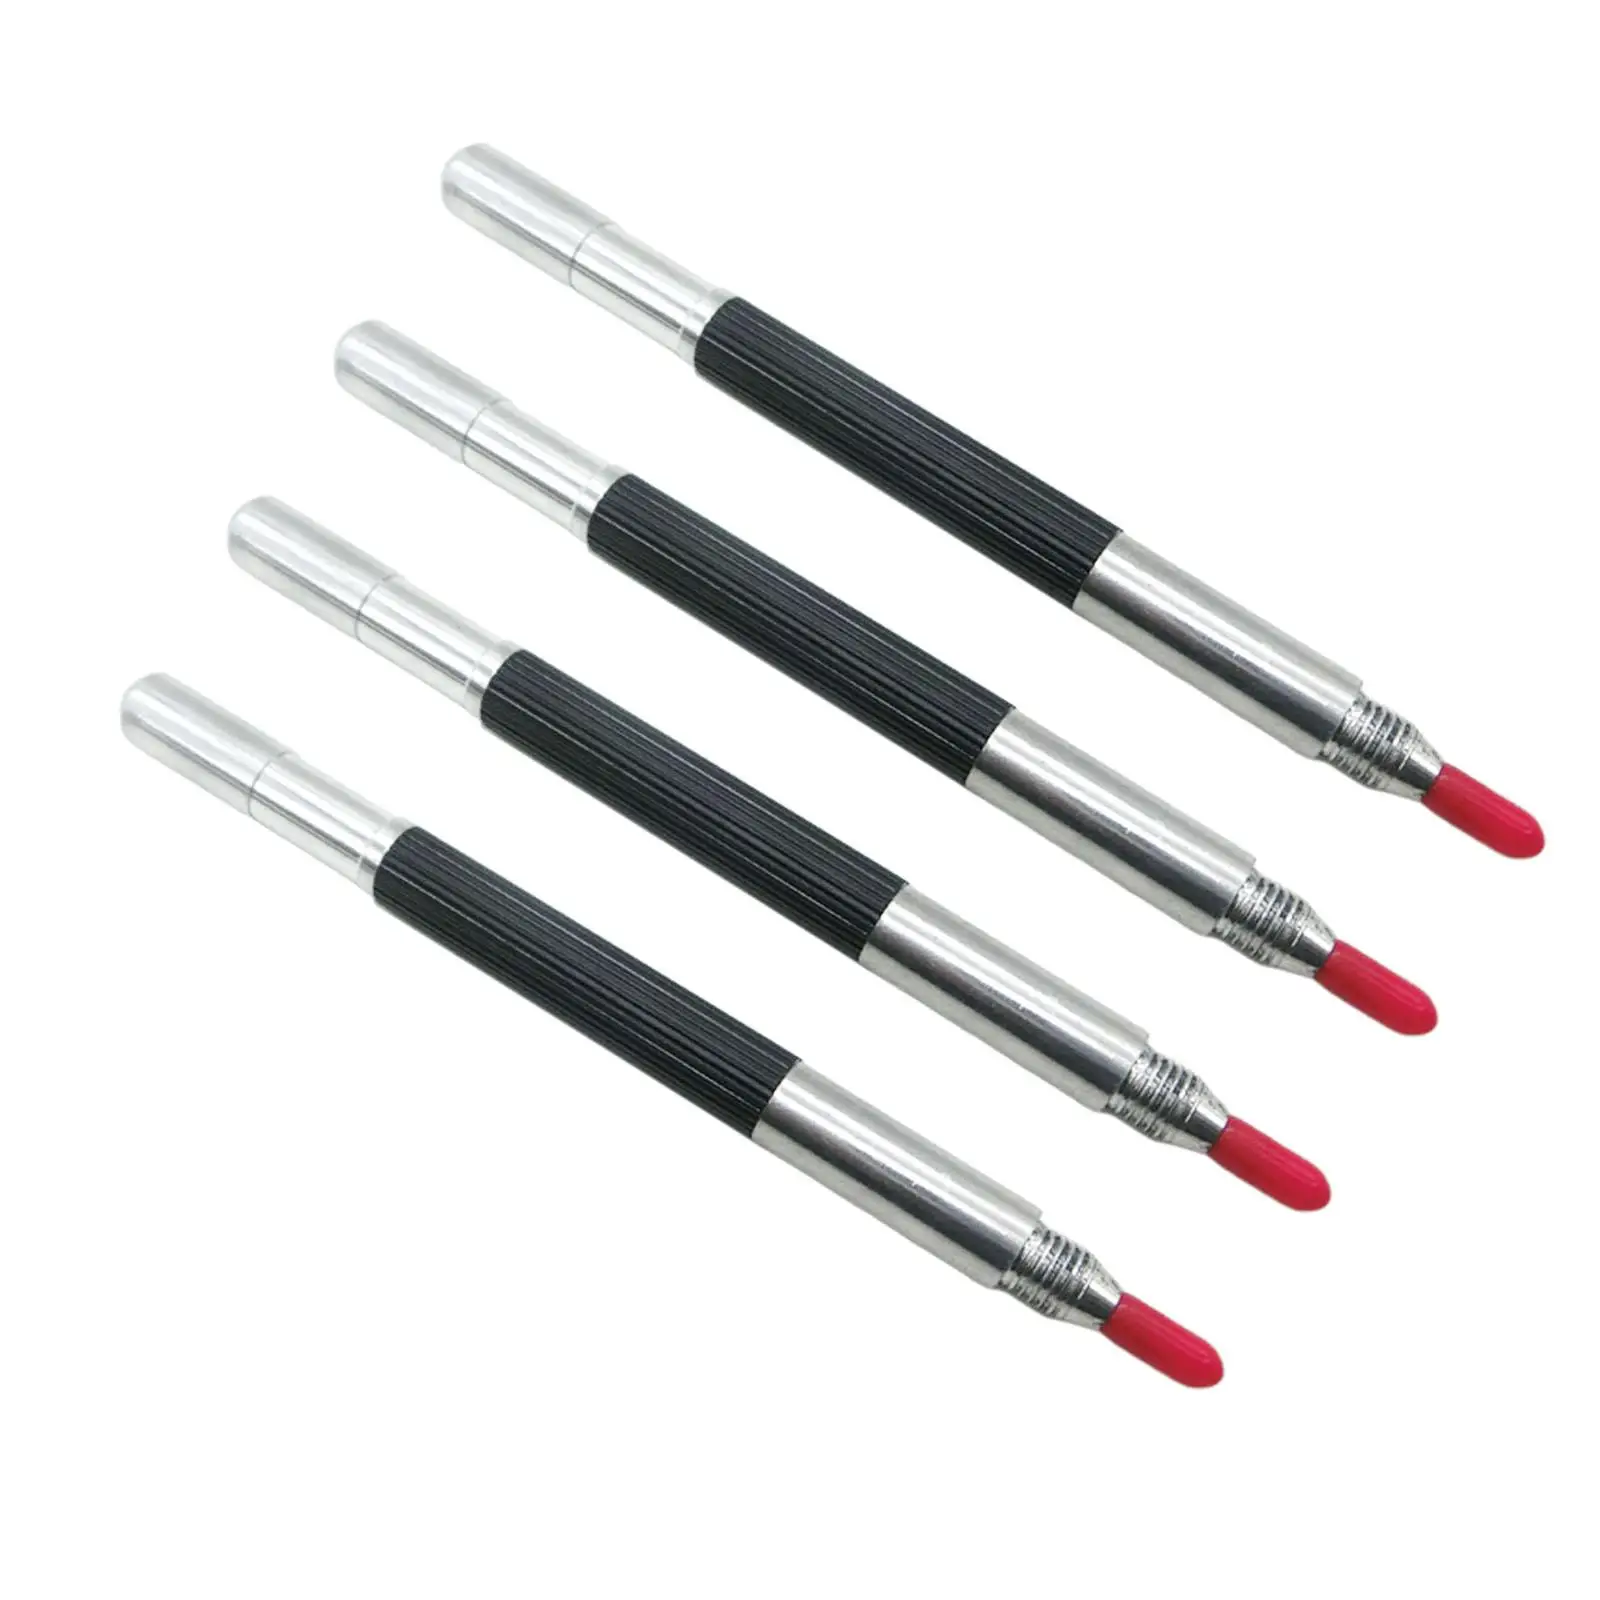 4 Pieces Hardness Engraving Pen Construction Marker Tools Cutting Engraver Tungsten Carbide Tip Scriber Pens for Hardened Steel